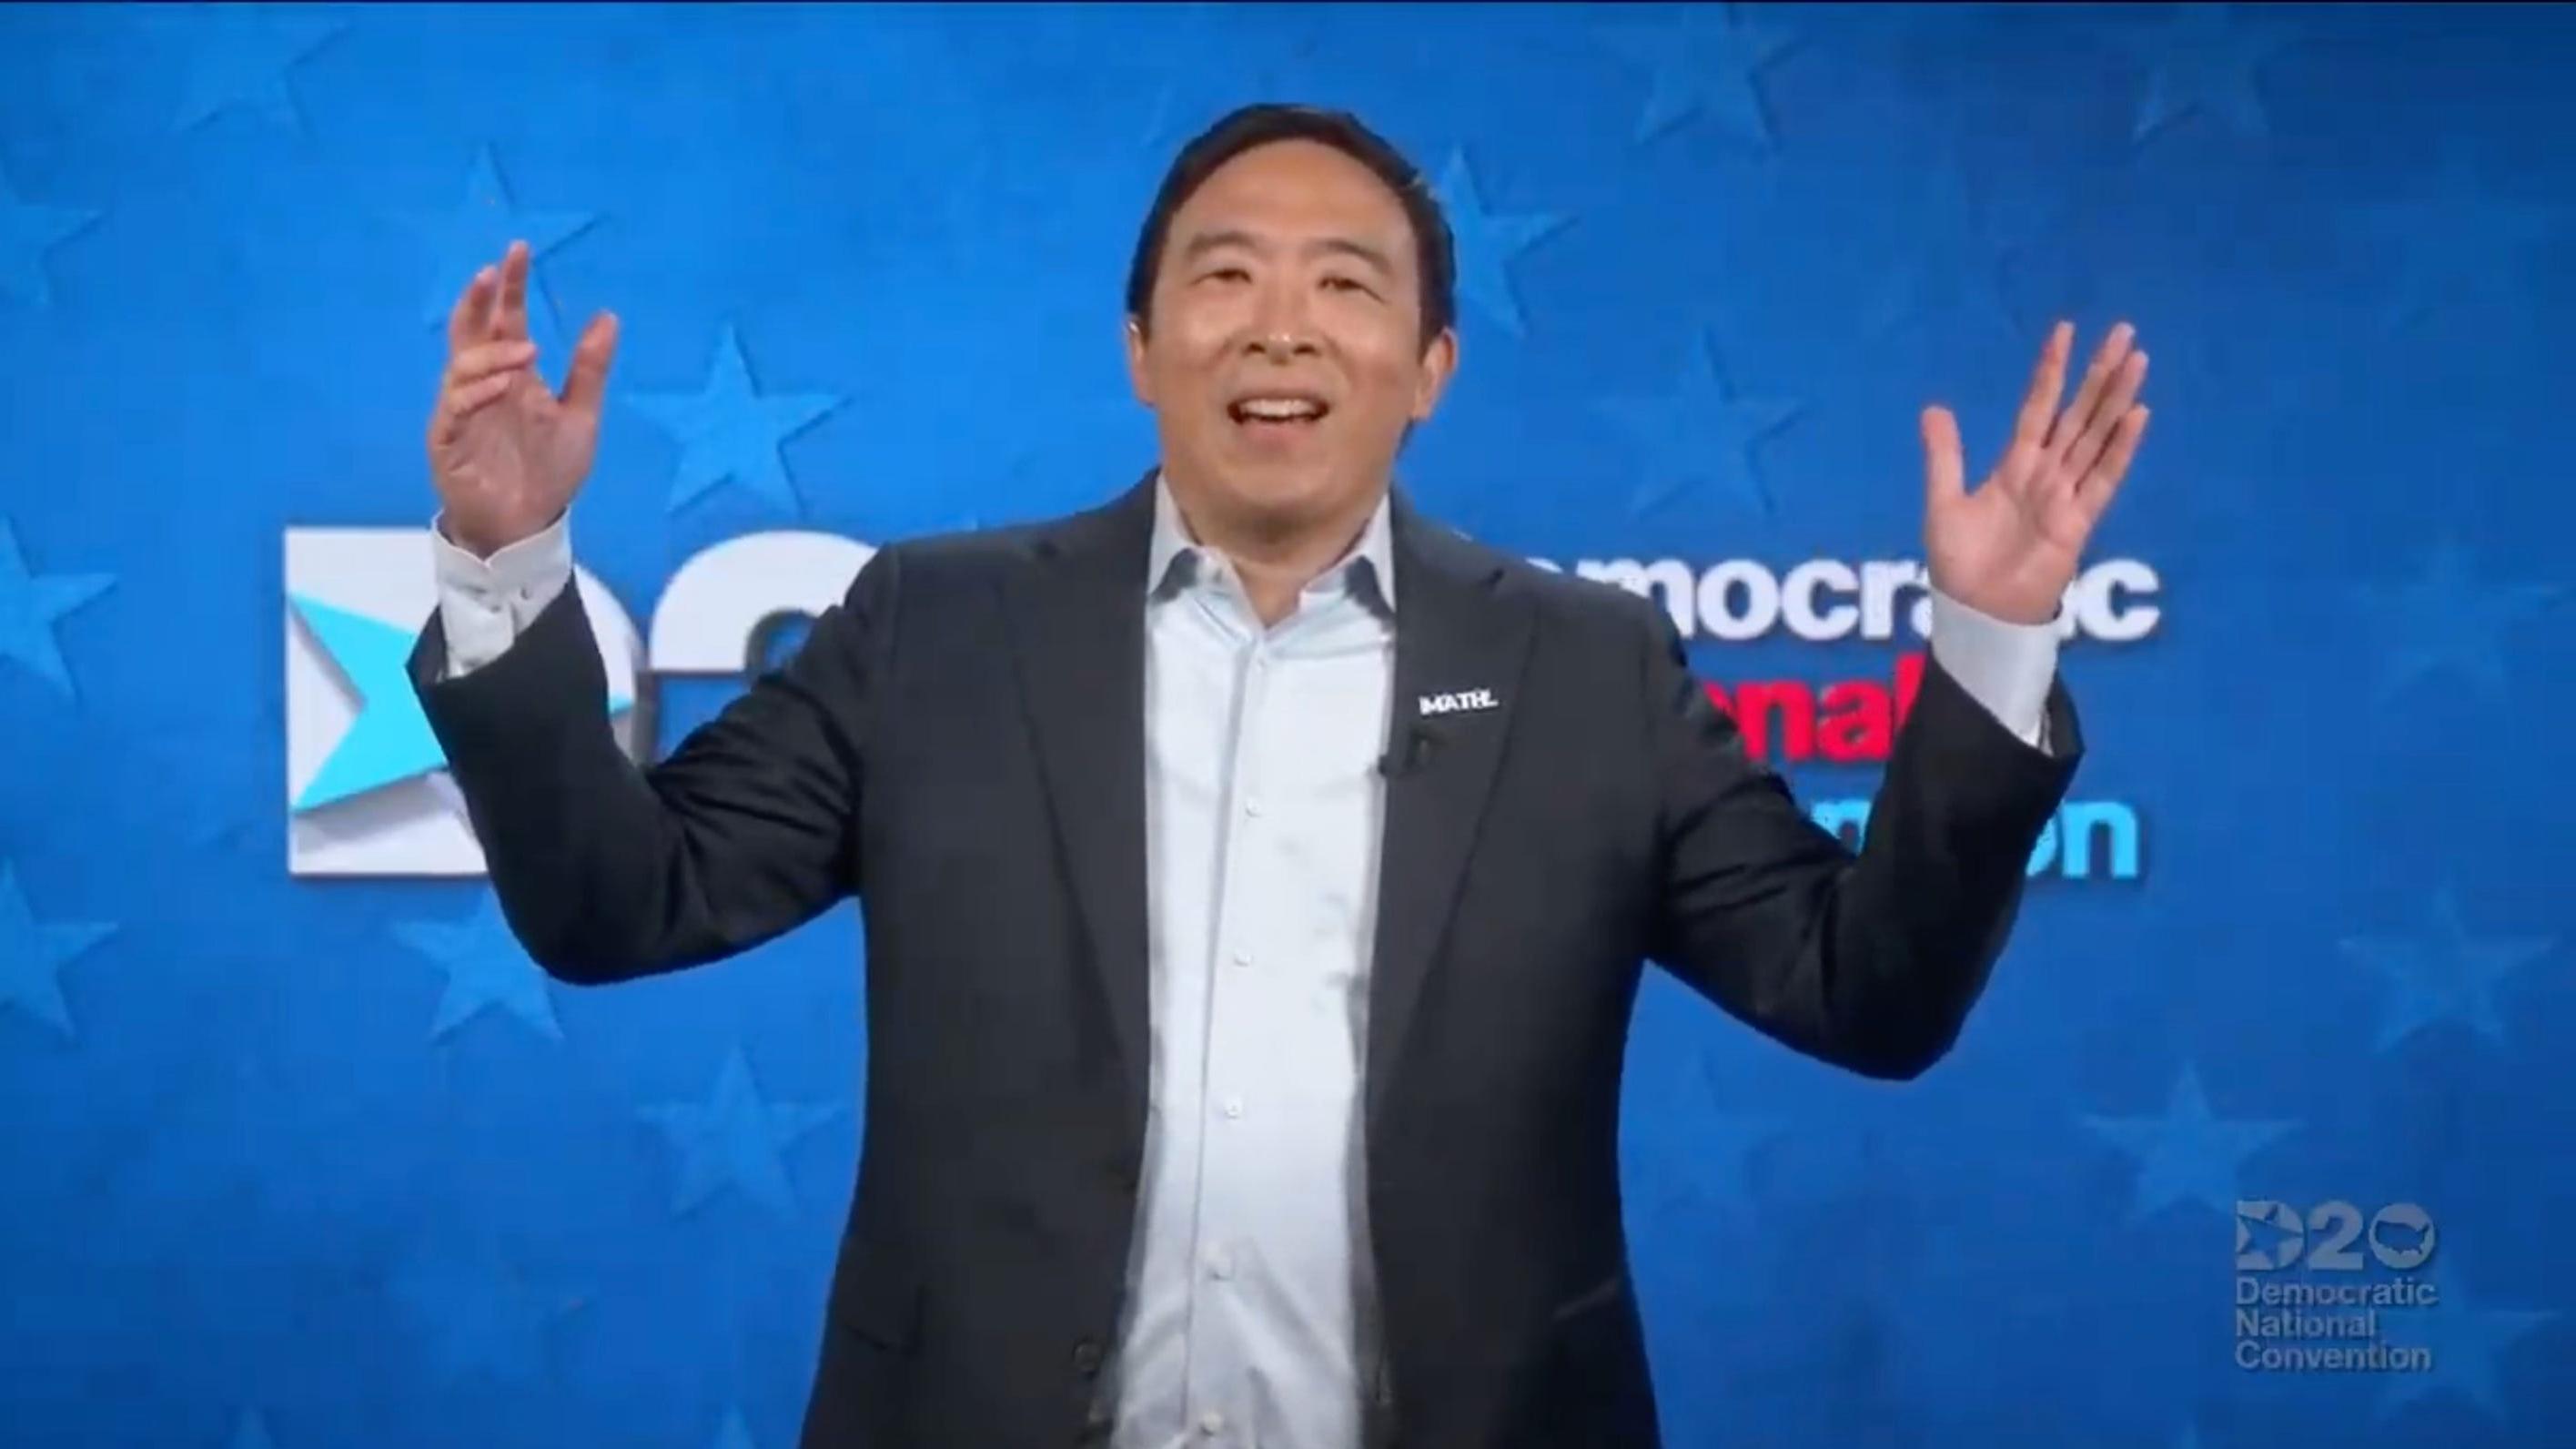 Former candidate for President, Andrew Yang, speaks to viewers during the Democratic National Convention at the Wisconsin Center, Thursday, Aug. 20, 2020. Xxx Sd News Democratic National Convention / Democratic National Convention via Imagn Content Services, LLC